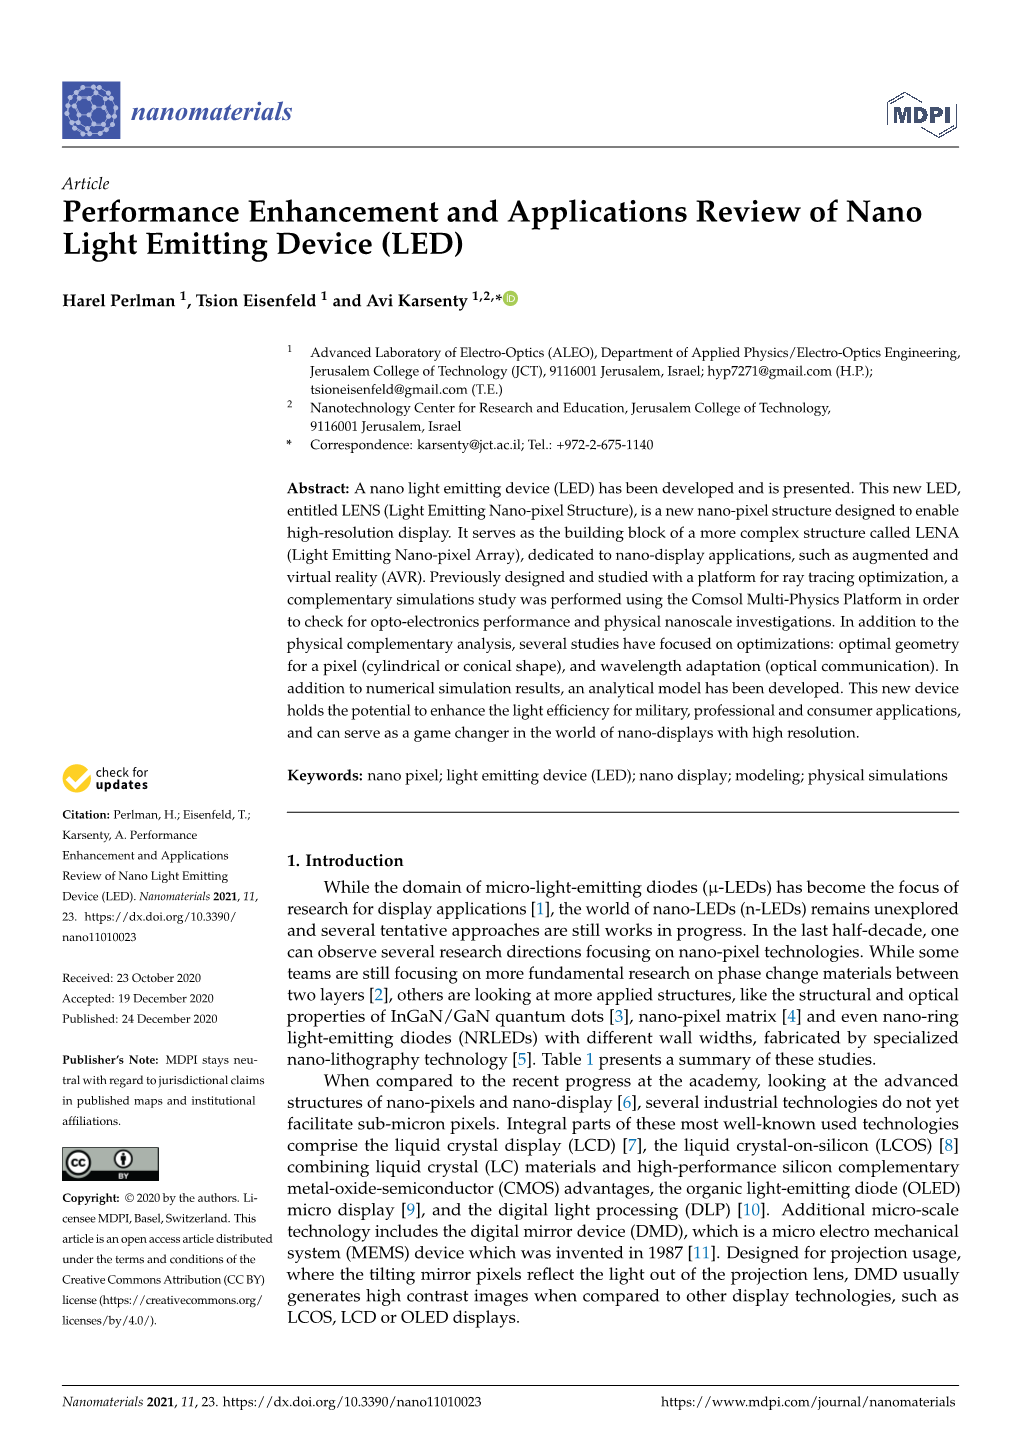 Performance Enhancement and Applications Review of Nano Light Emitting Device (LED)